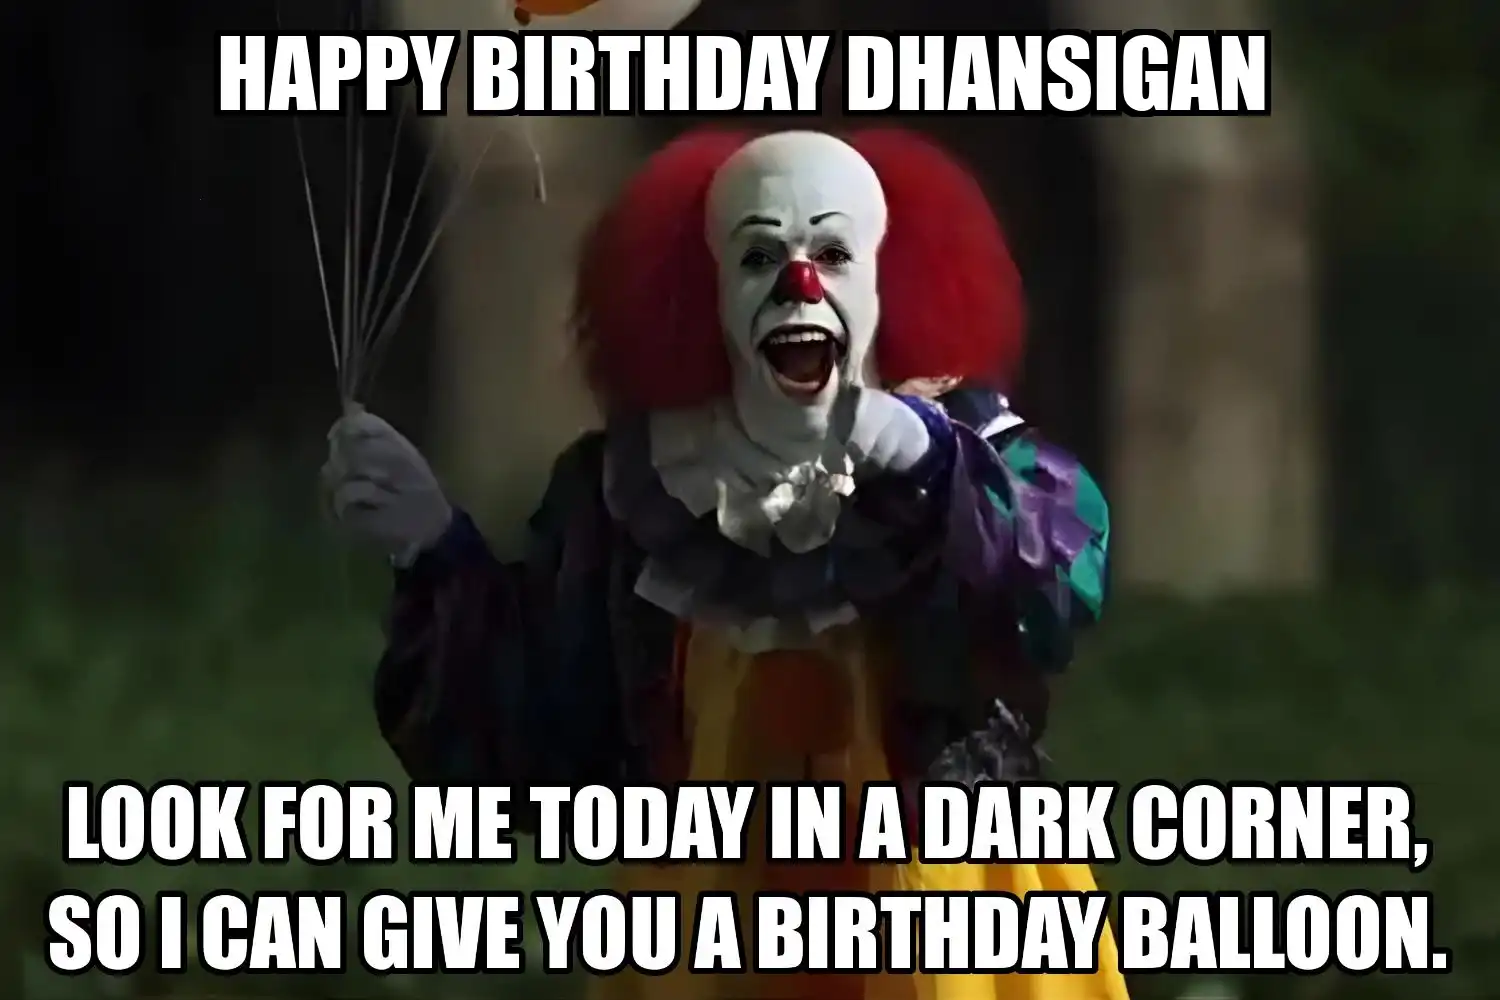 Happy Birthday Dhansigan I Can Give You A Balloon Meme